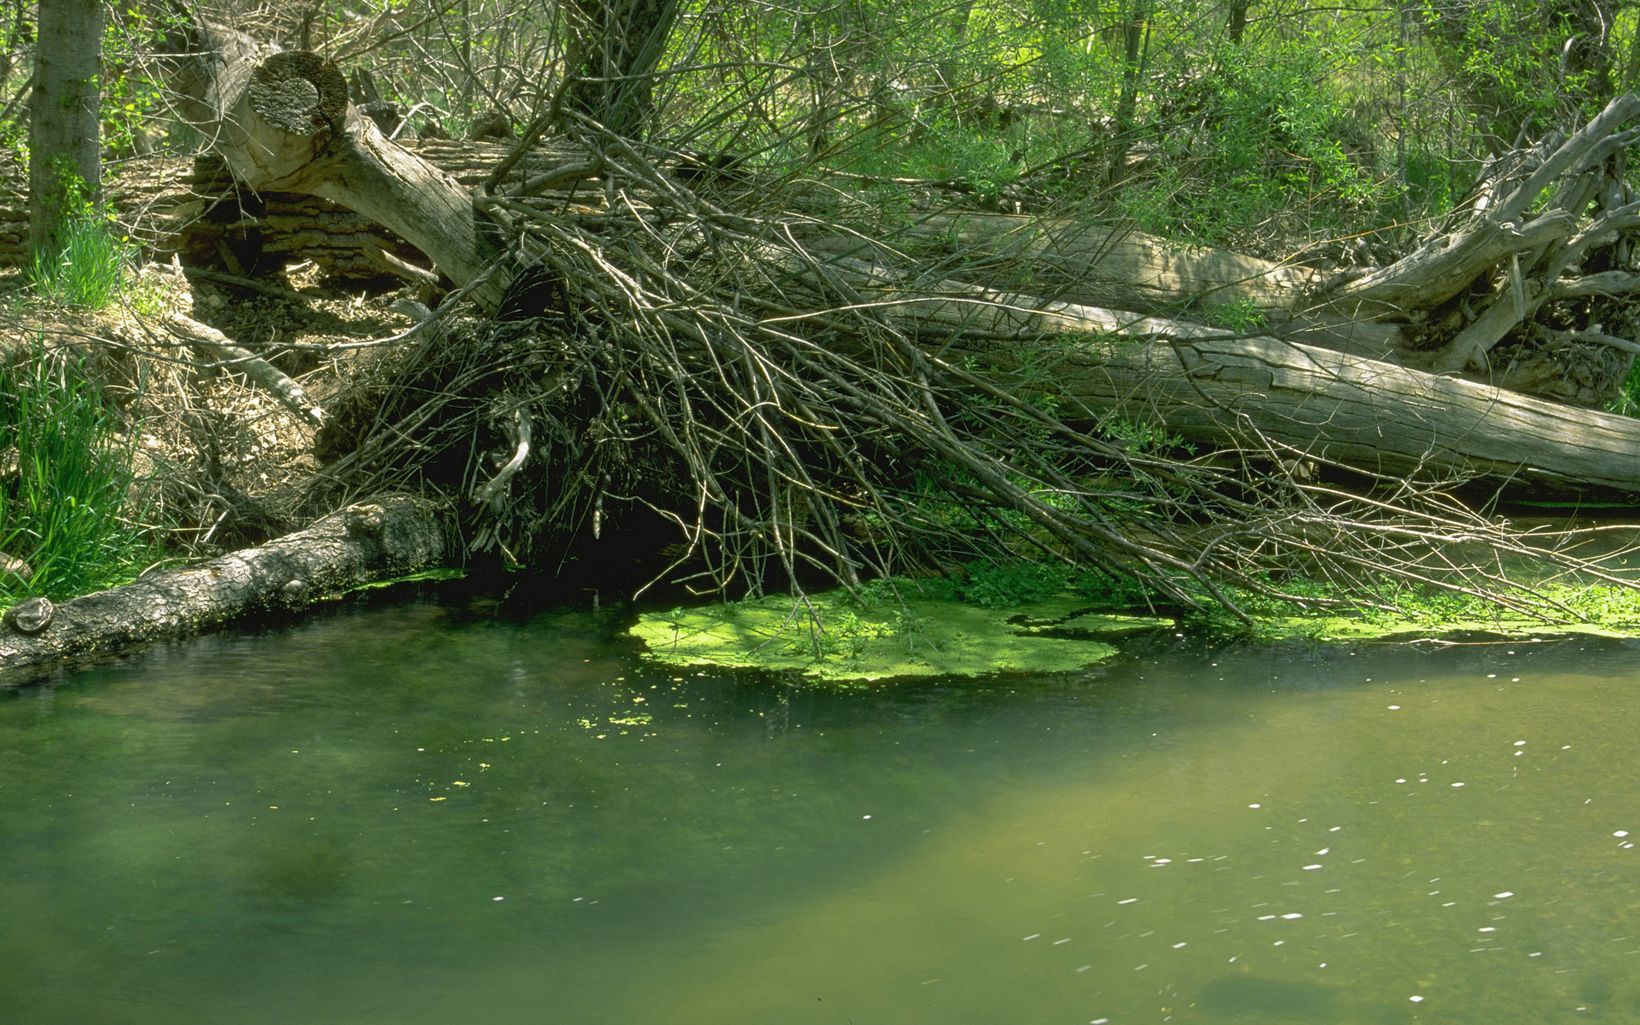 River bank with brush and fallen timber with algae-covered water flowing alongside it.